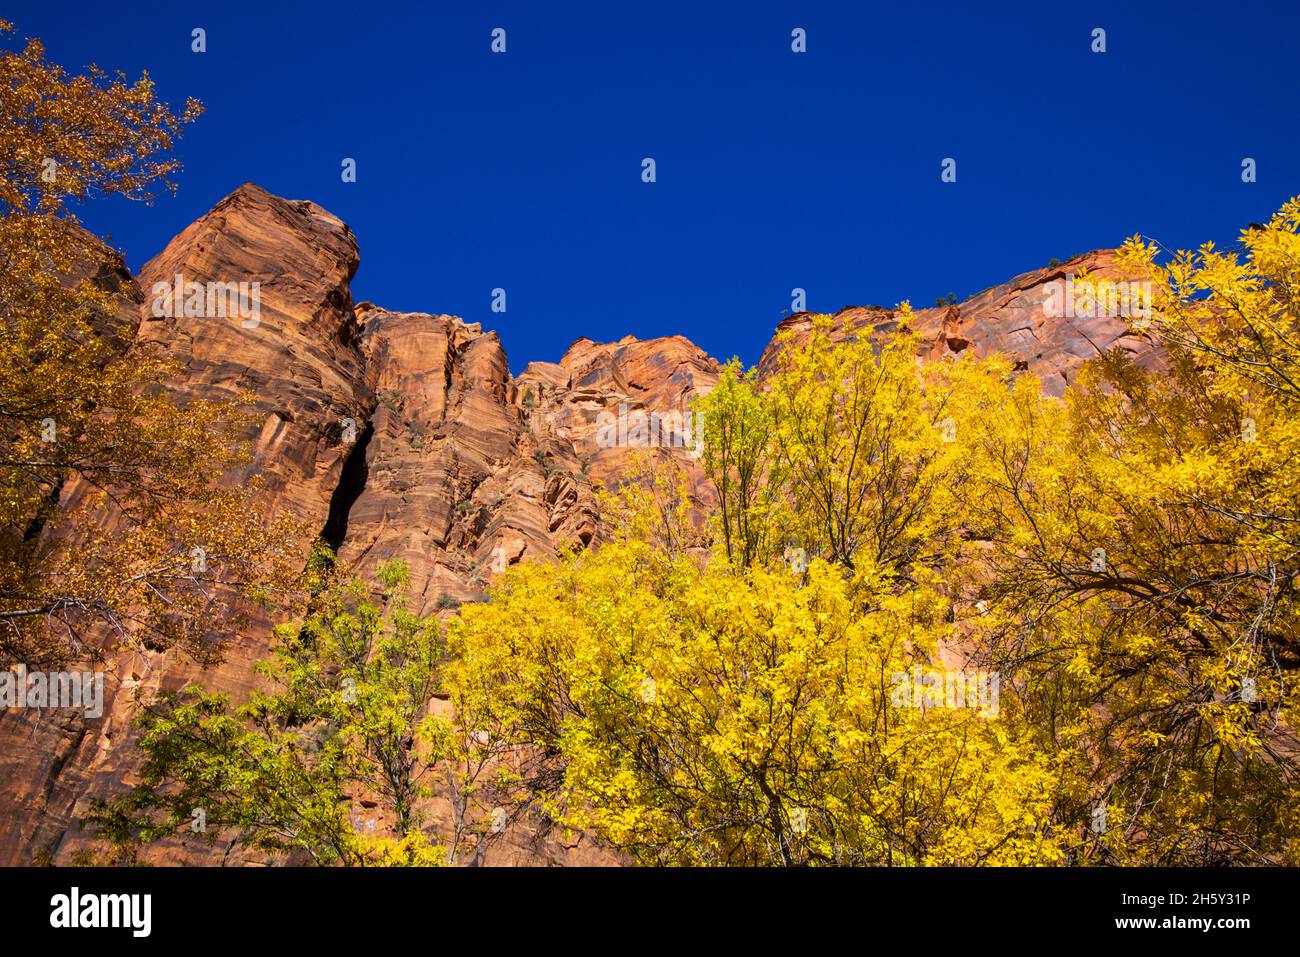 This a view of the spectacular red rock walls in the Temple of Sinawava area of Zion National Park, Springdale, Washington County, Utah, USA. Stock Photo